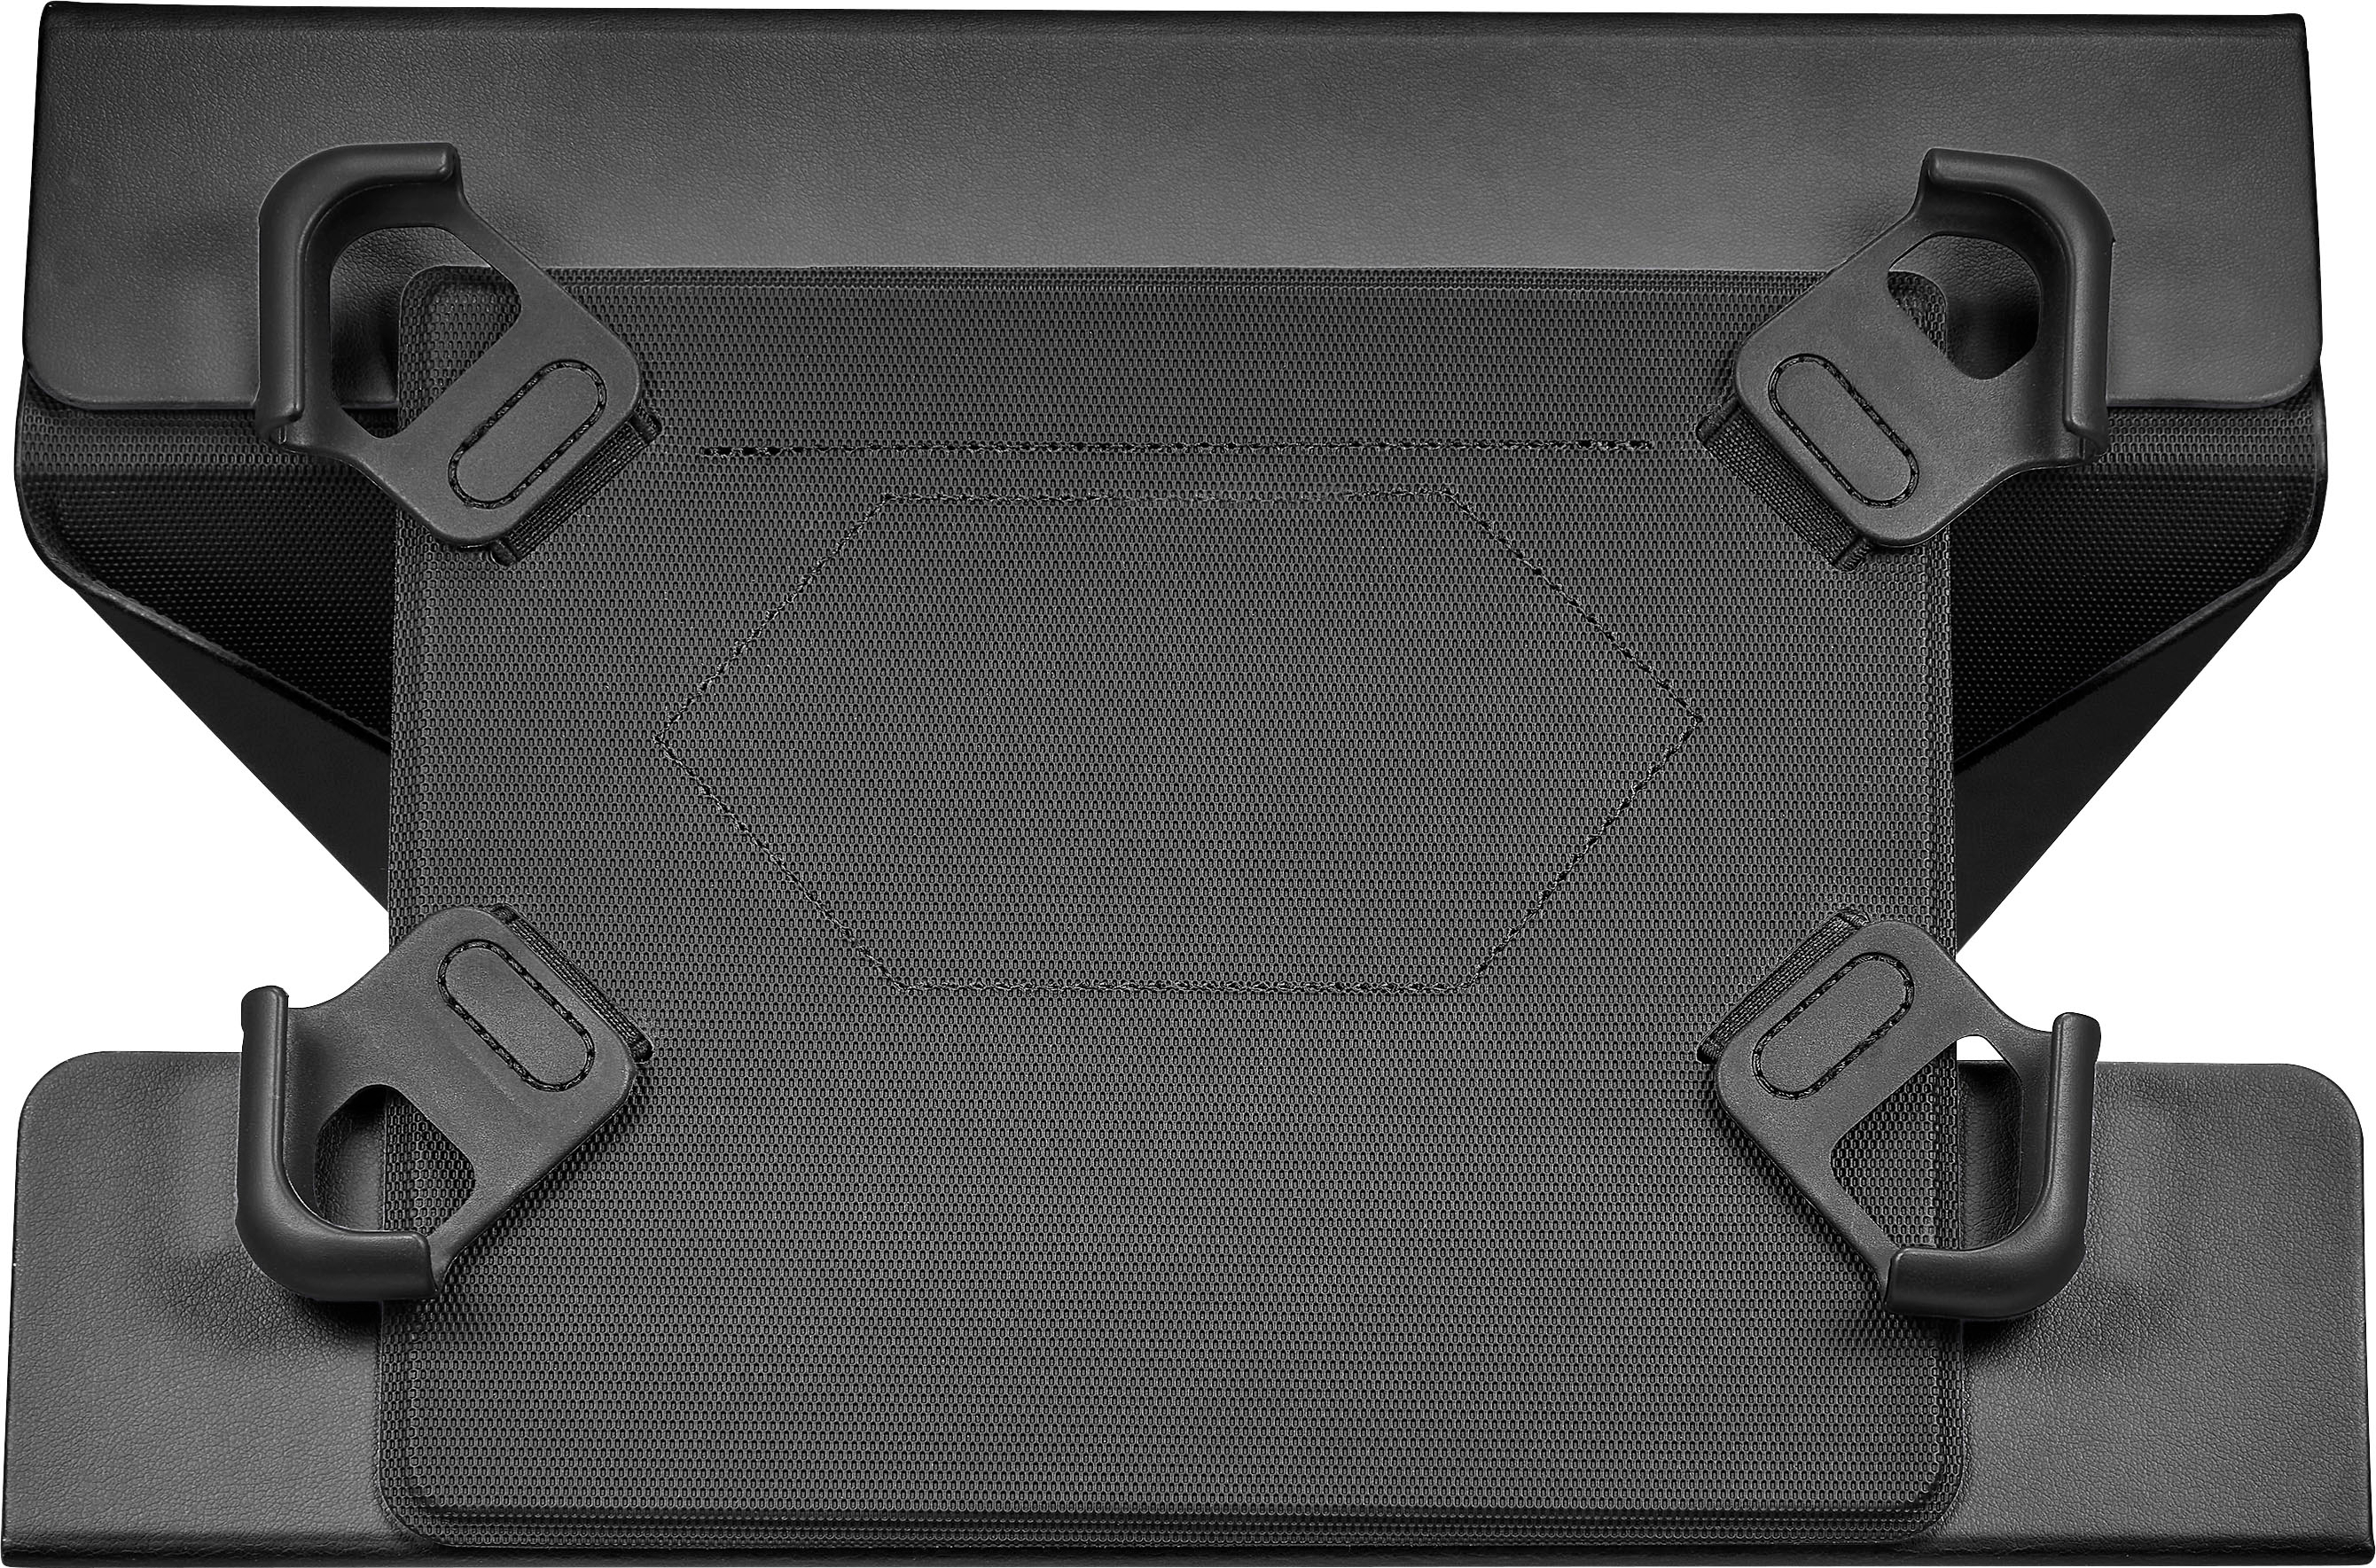 Angle View: Insignia™ - Universal FlexView Folio Case for most 9" to 11" tablets - Black